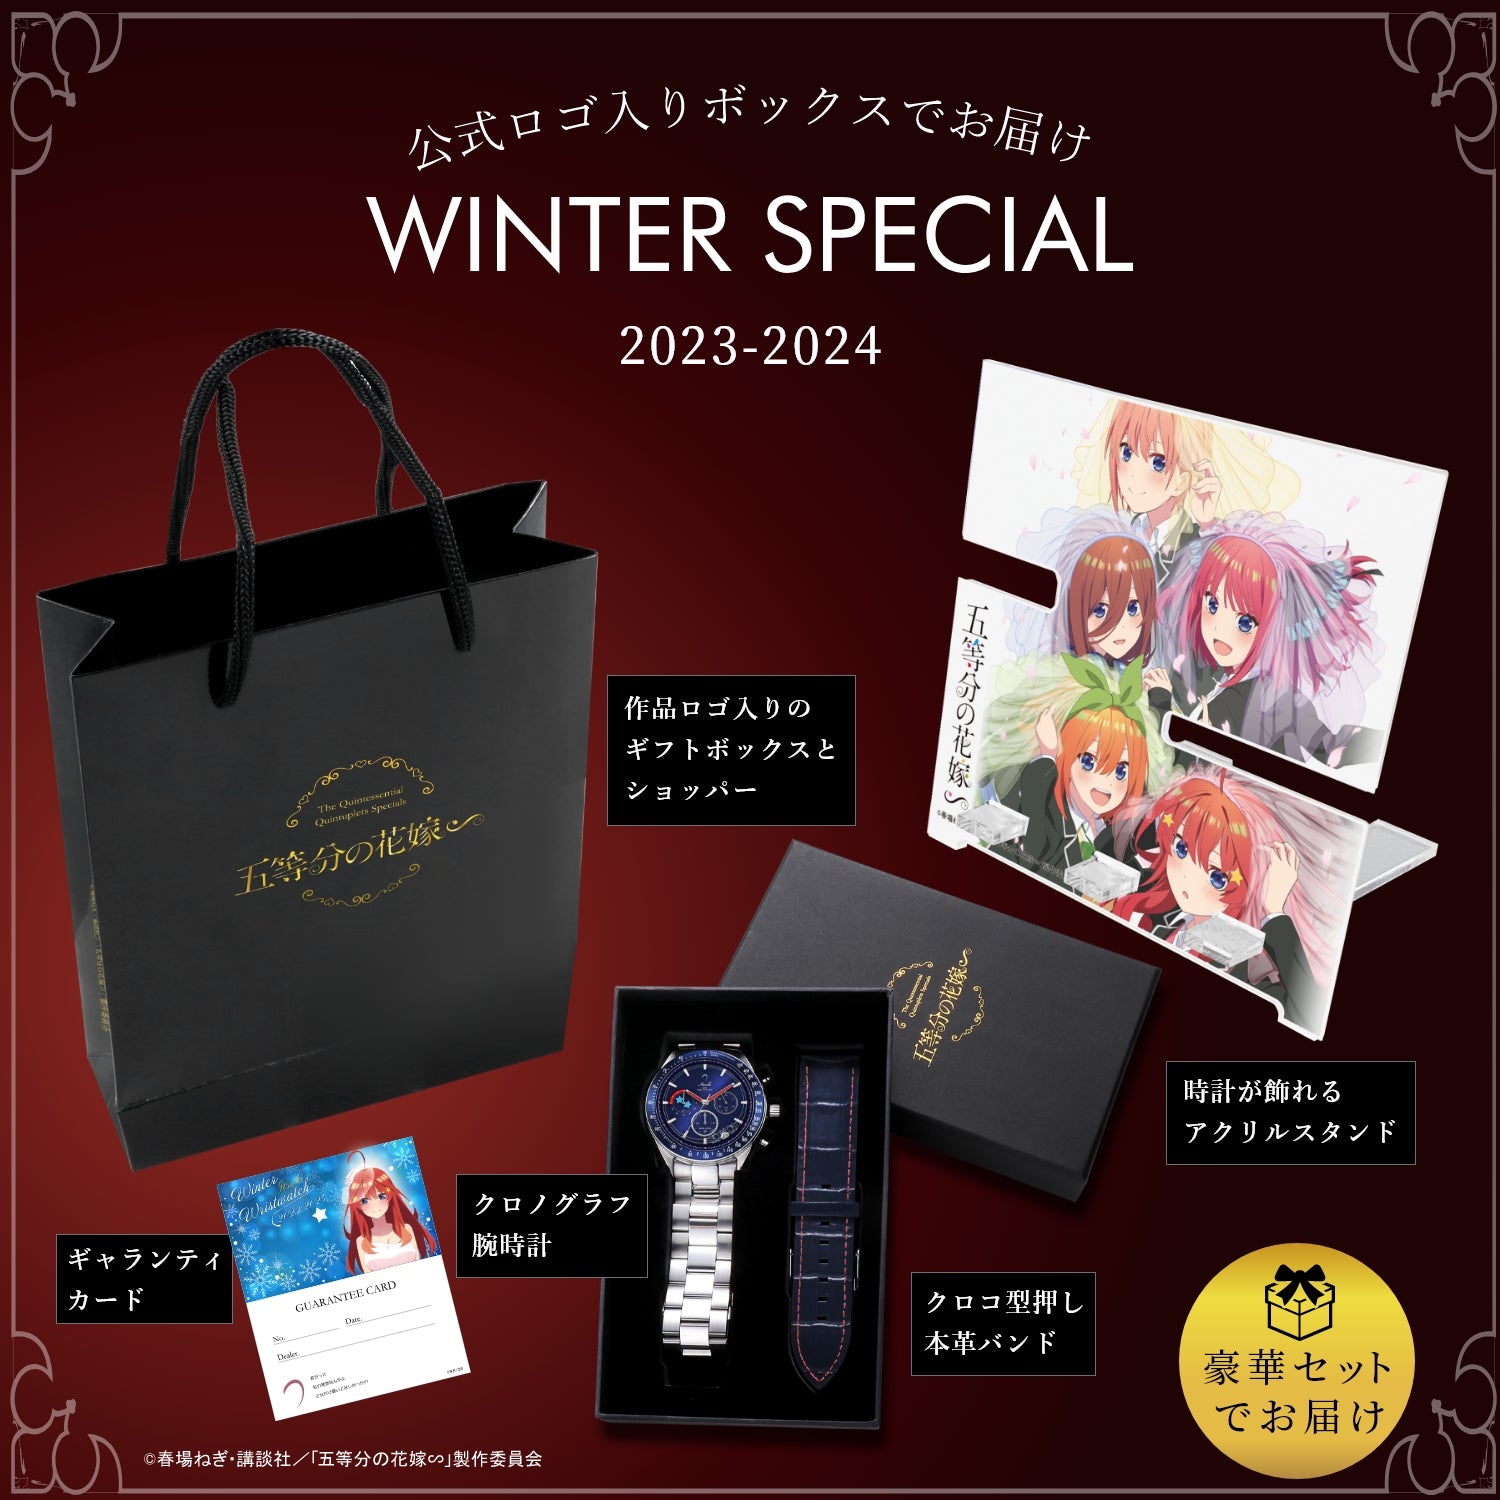 TV special anime“The Quintessential Quintuplets” Radio Solar Chronograph Winter Special model Change with belt| Itsuki Nakano